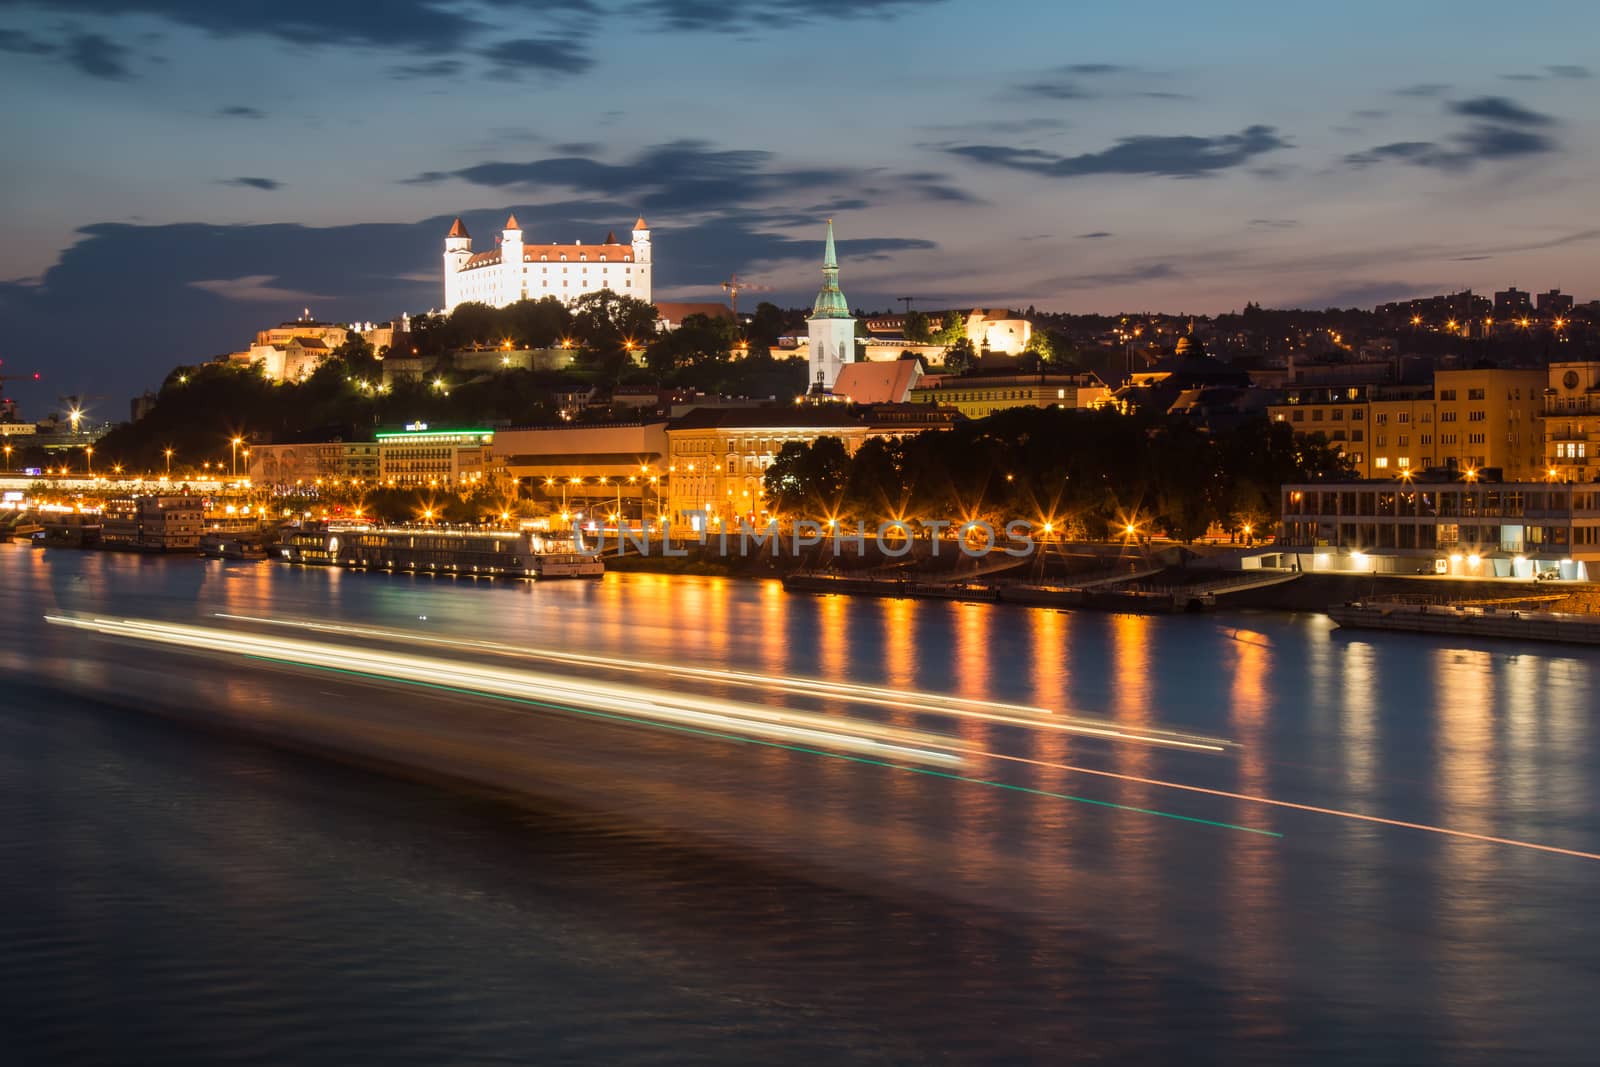 City Bratislava, capital of Slovak Republic. Night view on the river Danube with a passing boat, cathedral in the old city and the castle.